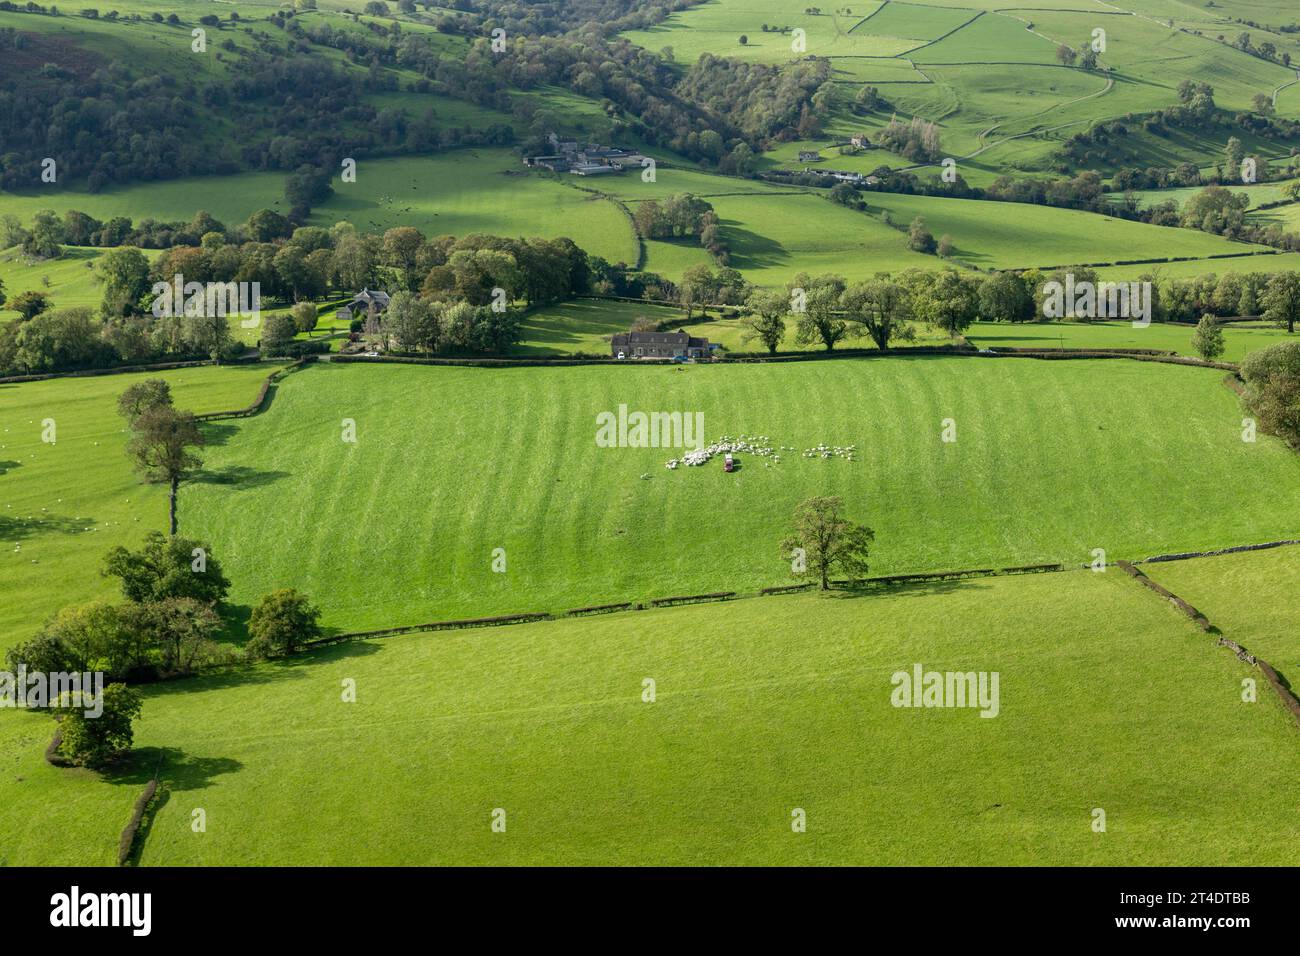 A picturesque patchwork of green fields near Ilam, viewed from Bunster Hill, Staffordshire, England Stock Photo